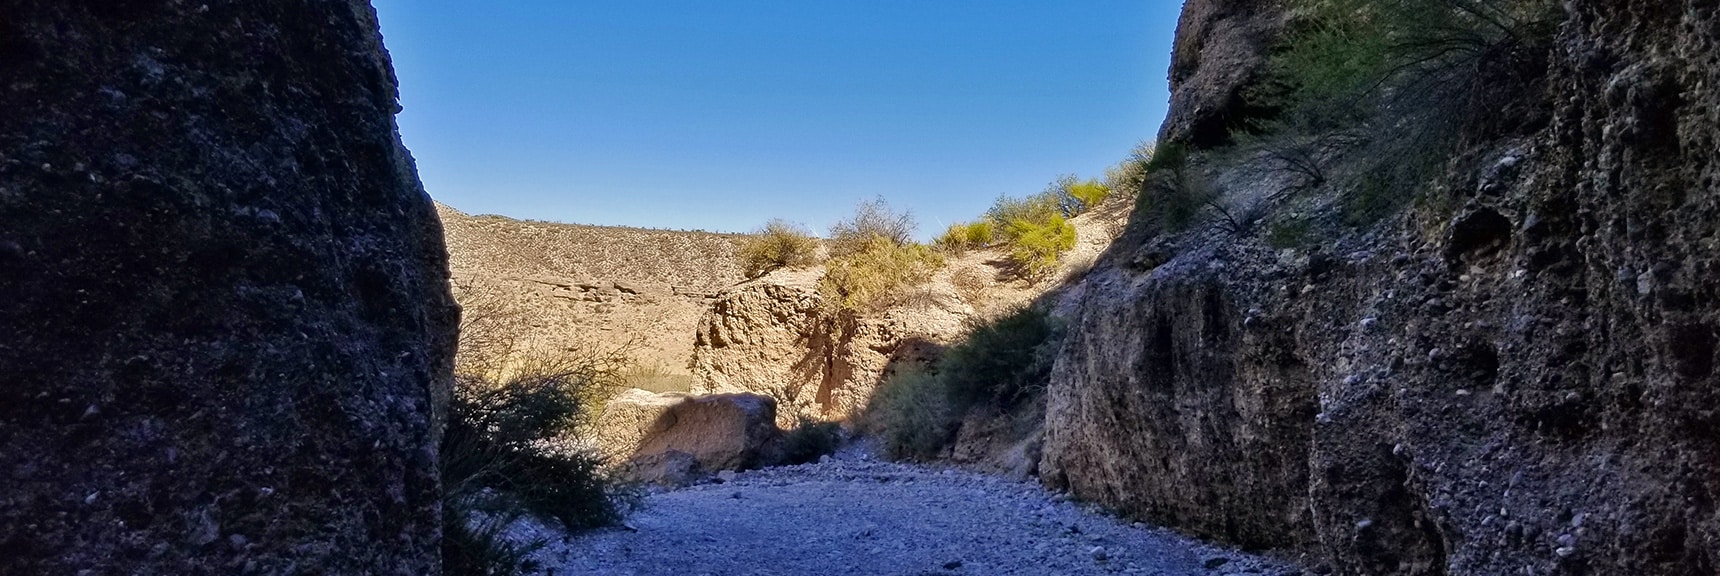 View Back Down Out the Opening of the Slot Canyon | Harris Springs Canyon | Biking from Centennial Hills | Spring Mountains, Nevada